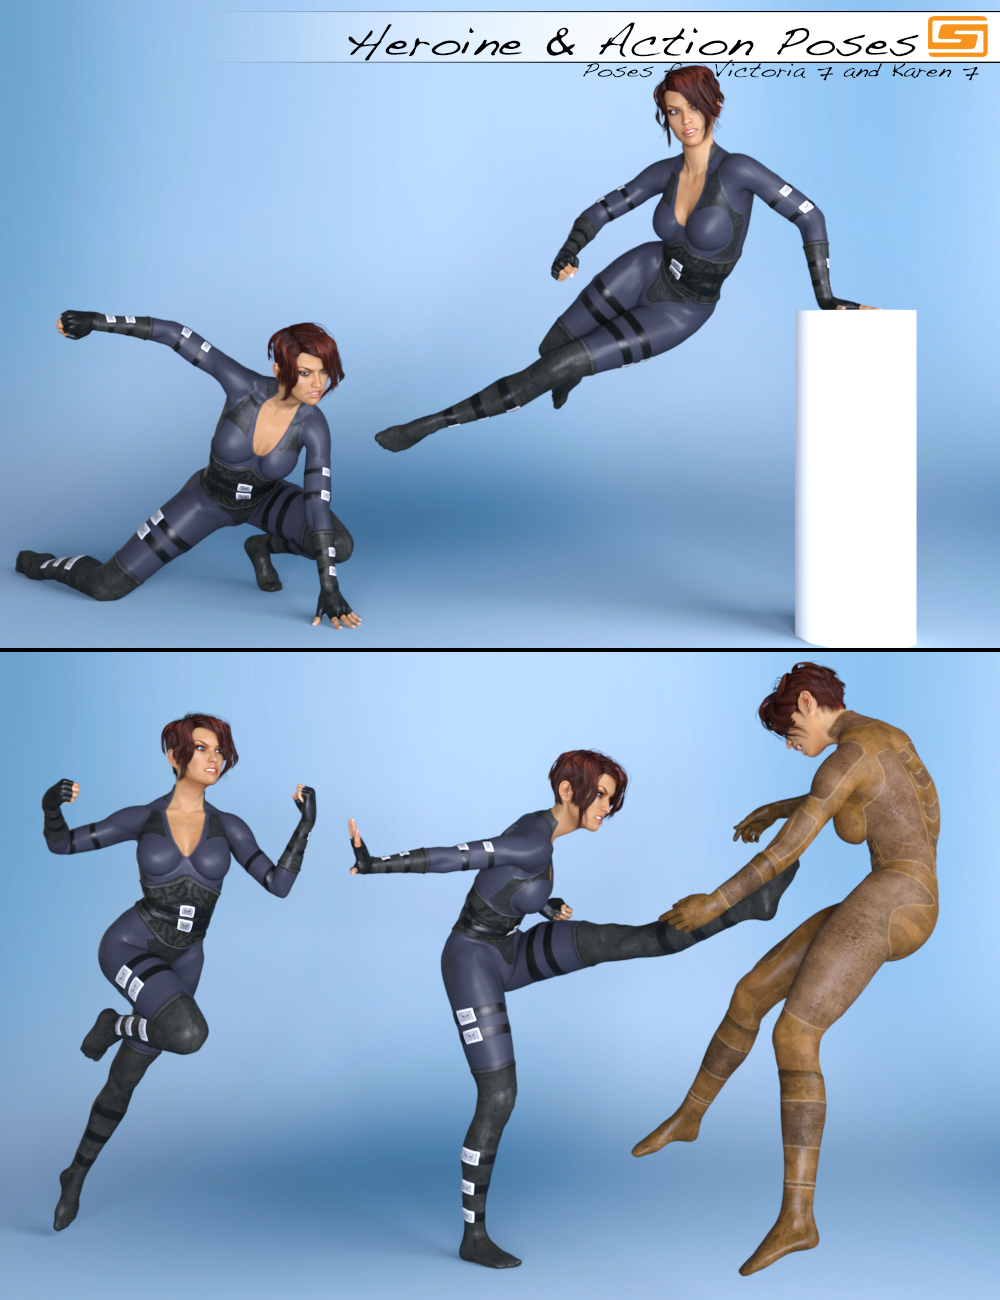 Heroine & Action Poses for Victoria 7 and Karen 7 by: Sedor, 3D Models by Daz 3D